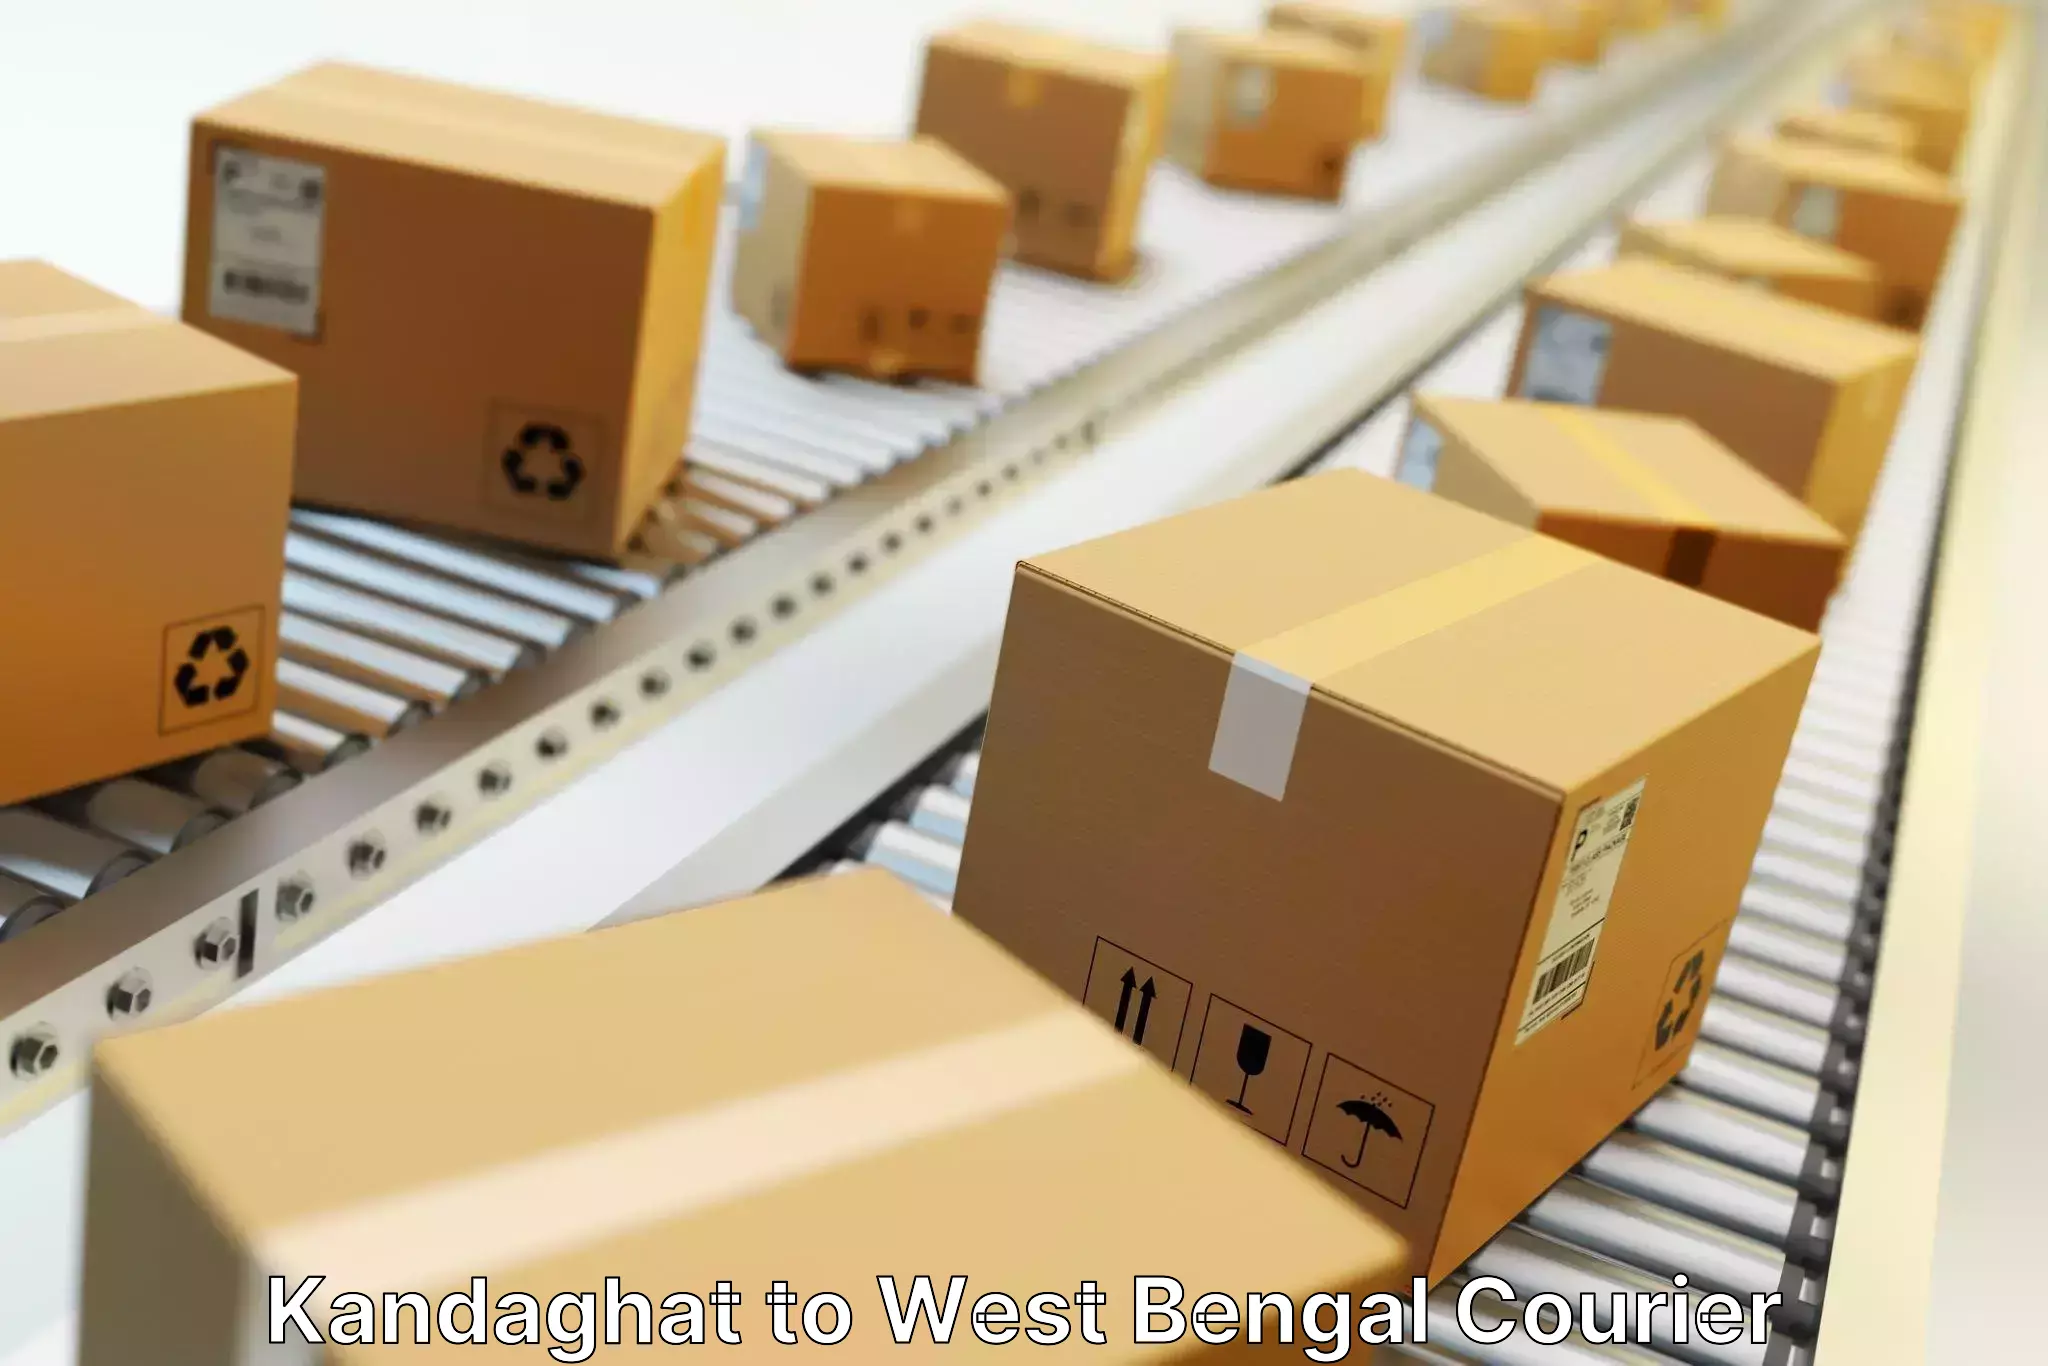 Parcel delivery automation in Kandaghat to Kolkata Port